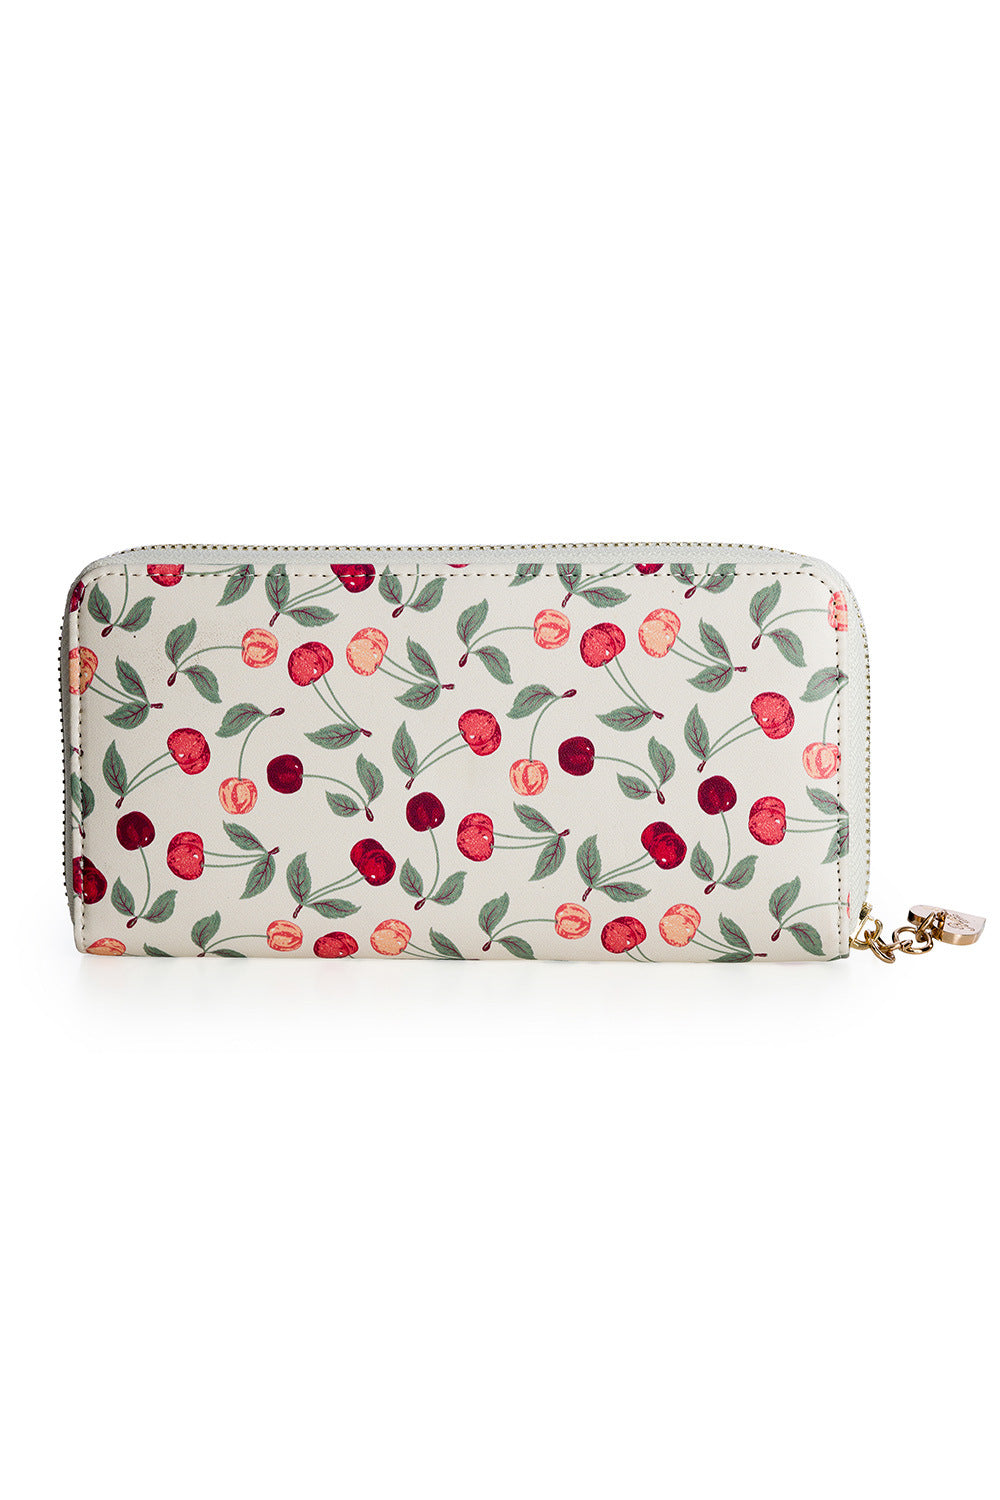 The back of the country cherry purse with no bow detail just a cherry print on a white background